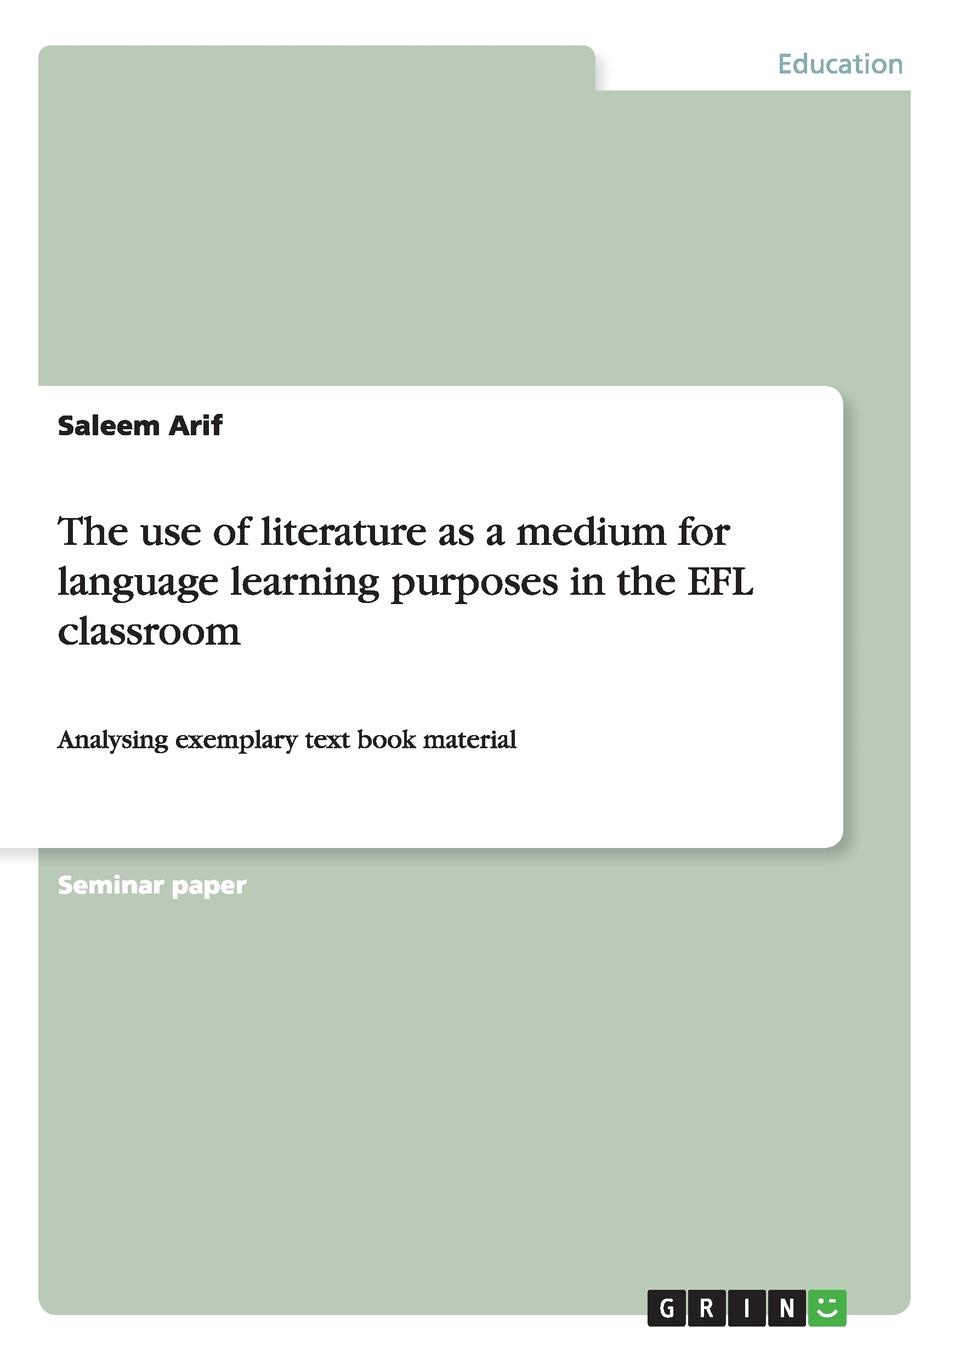 The use of literature as a medium for language learning purposes in the EFL classroom